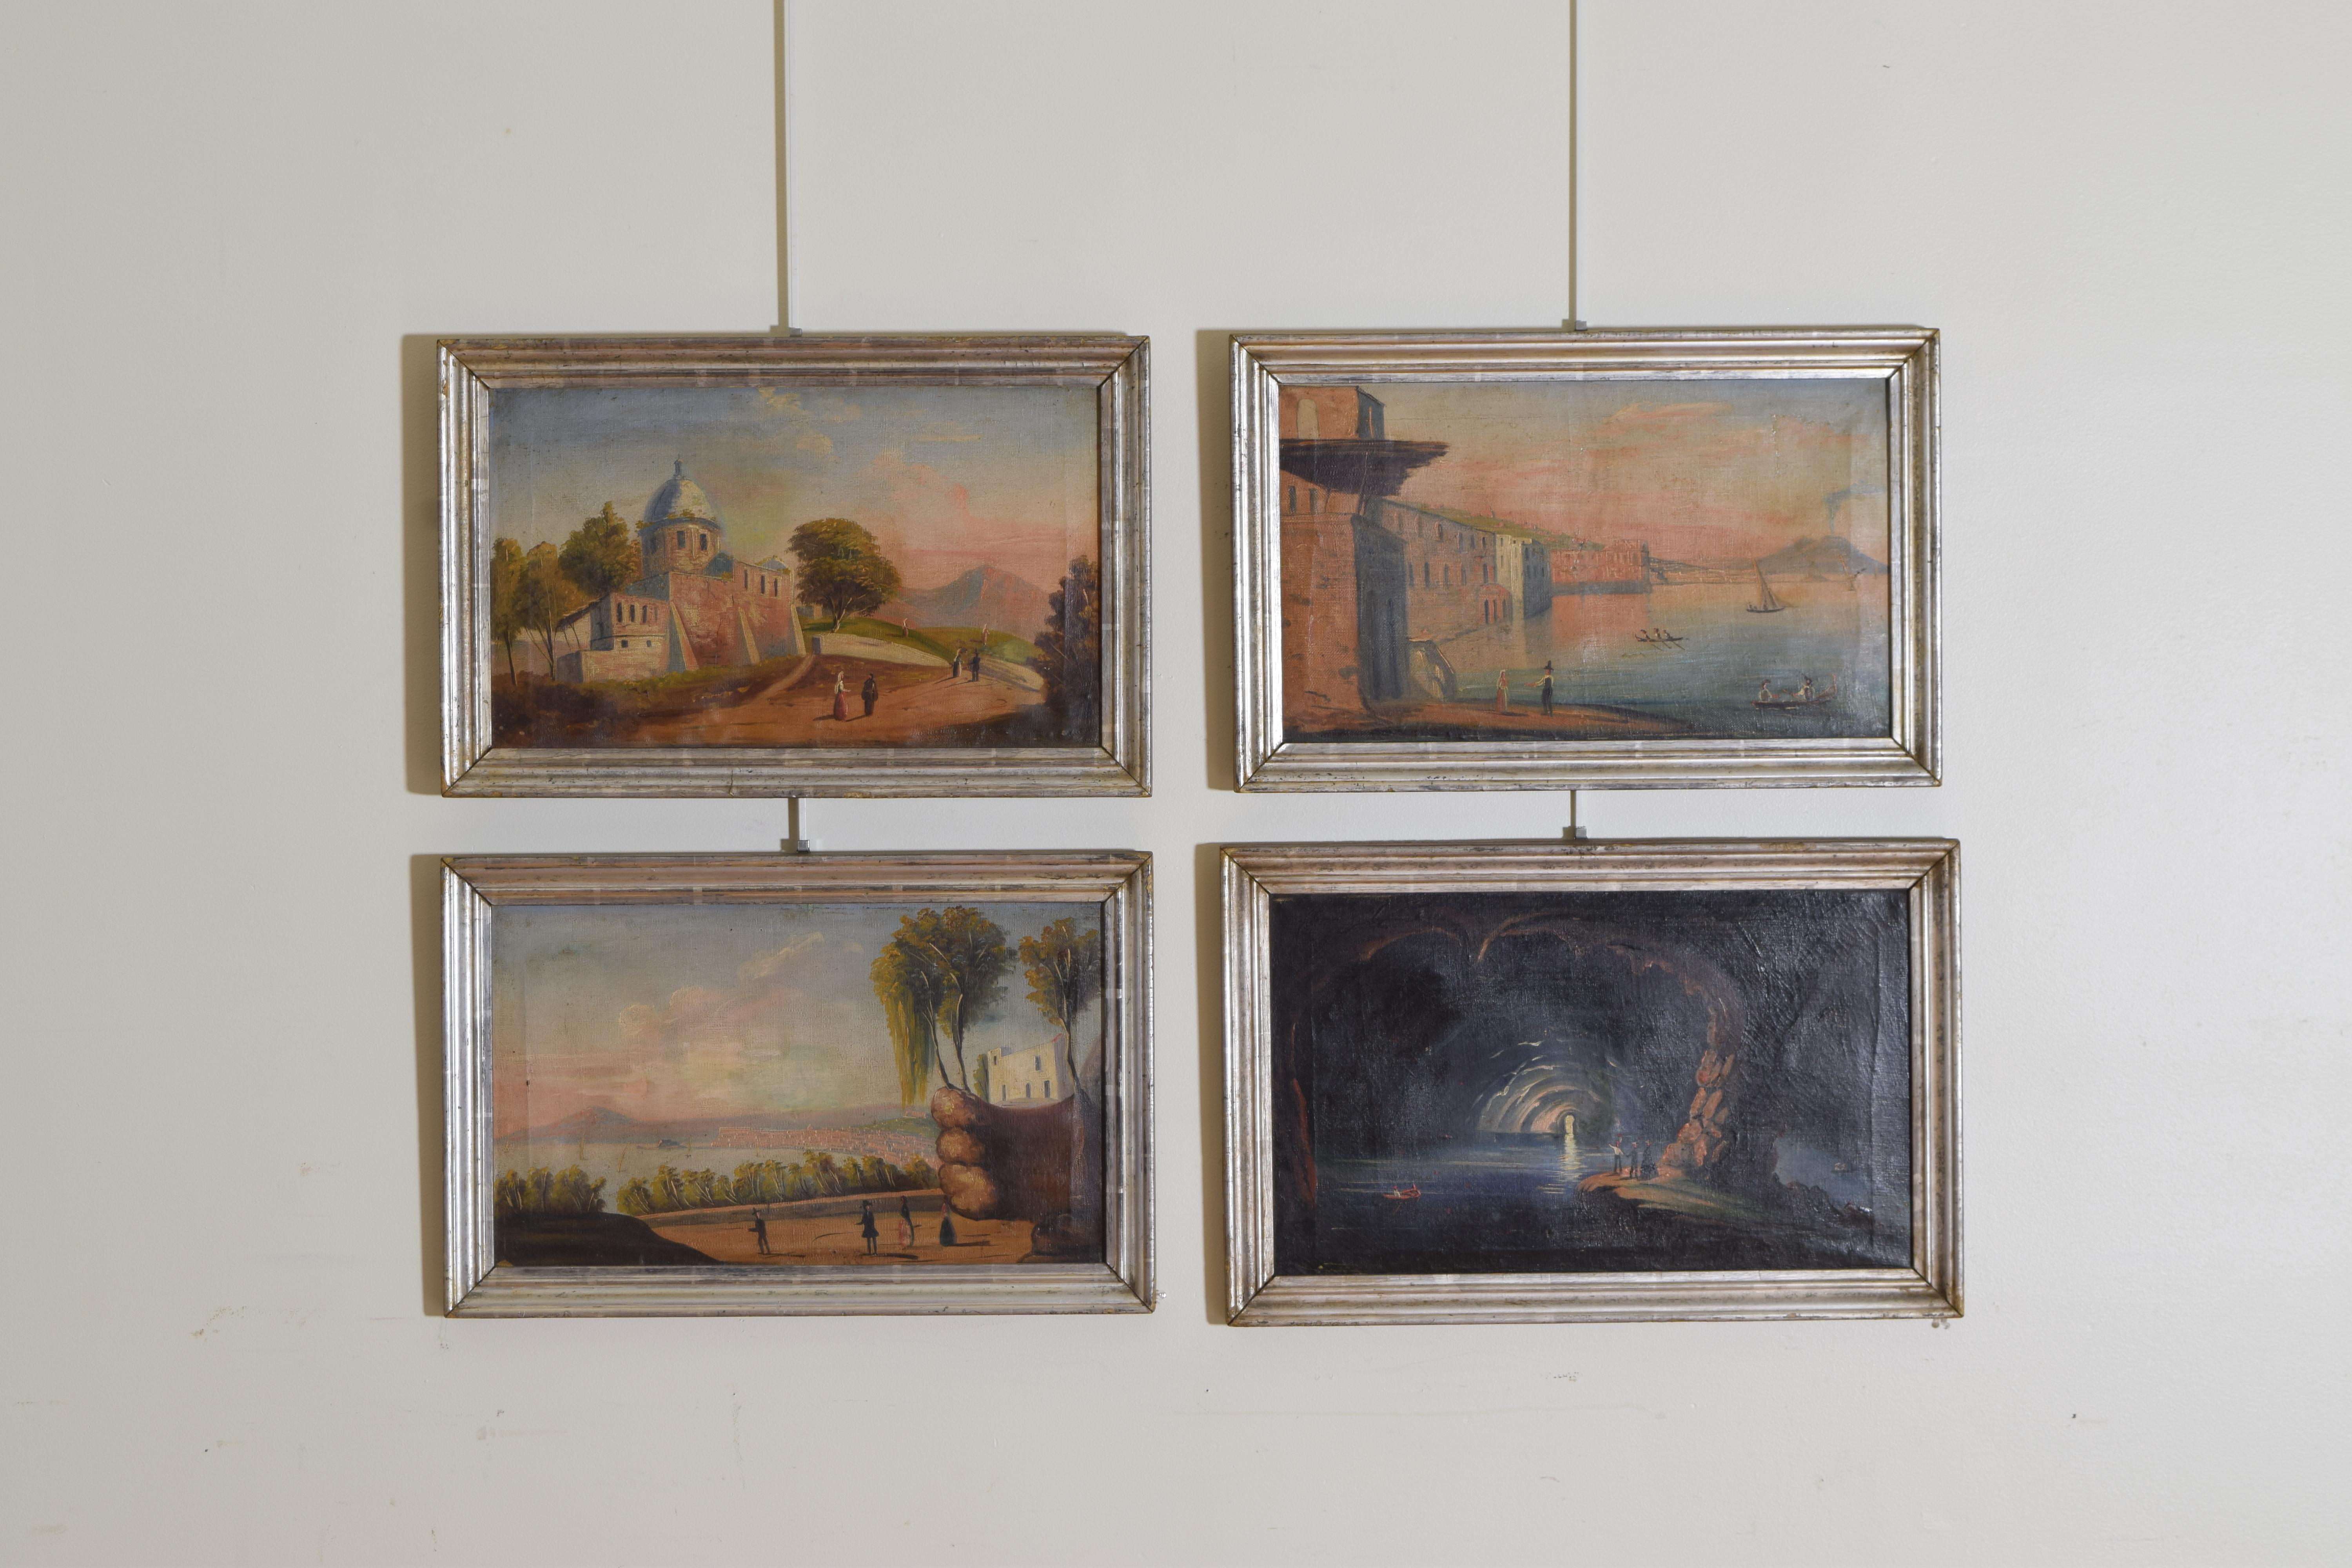 Of the Neapolitan school, these four painting depict views of the famed Blue Grotto of Capri, and eastward view of the Bay of Naples with smoldering Mount Vesuvius, a Westward view of the Bay of Naples, and a country church in the mountains above